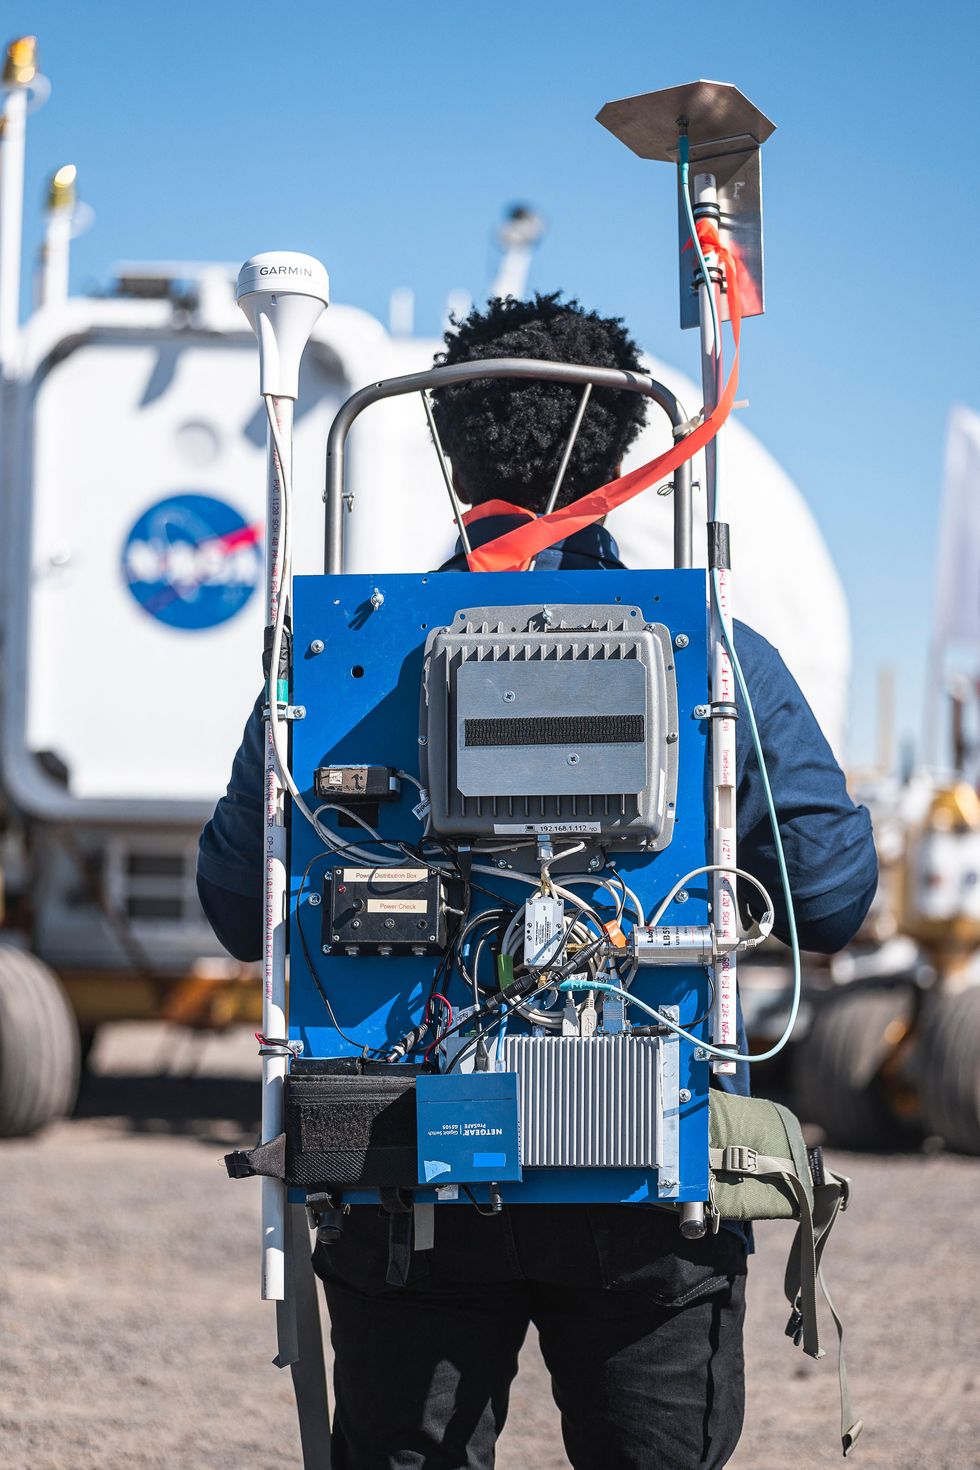 nasa deserts rats team member during a simulated moonwalk, with the lunar rover in the background